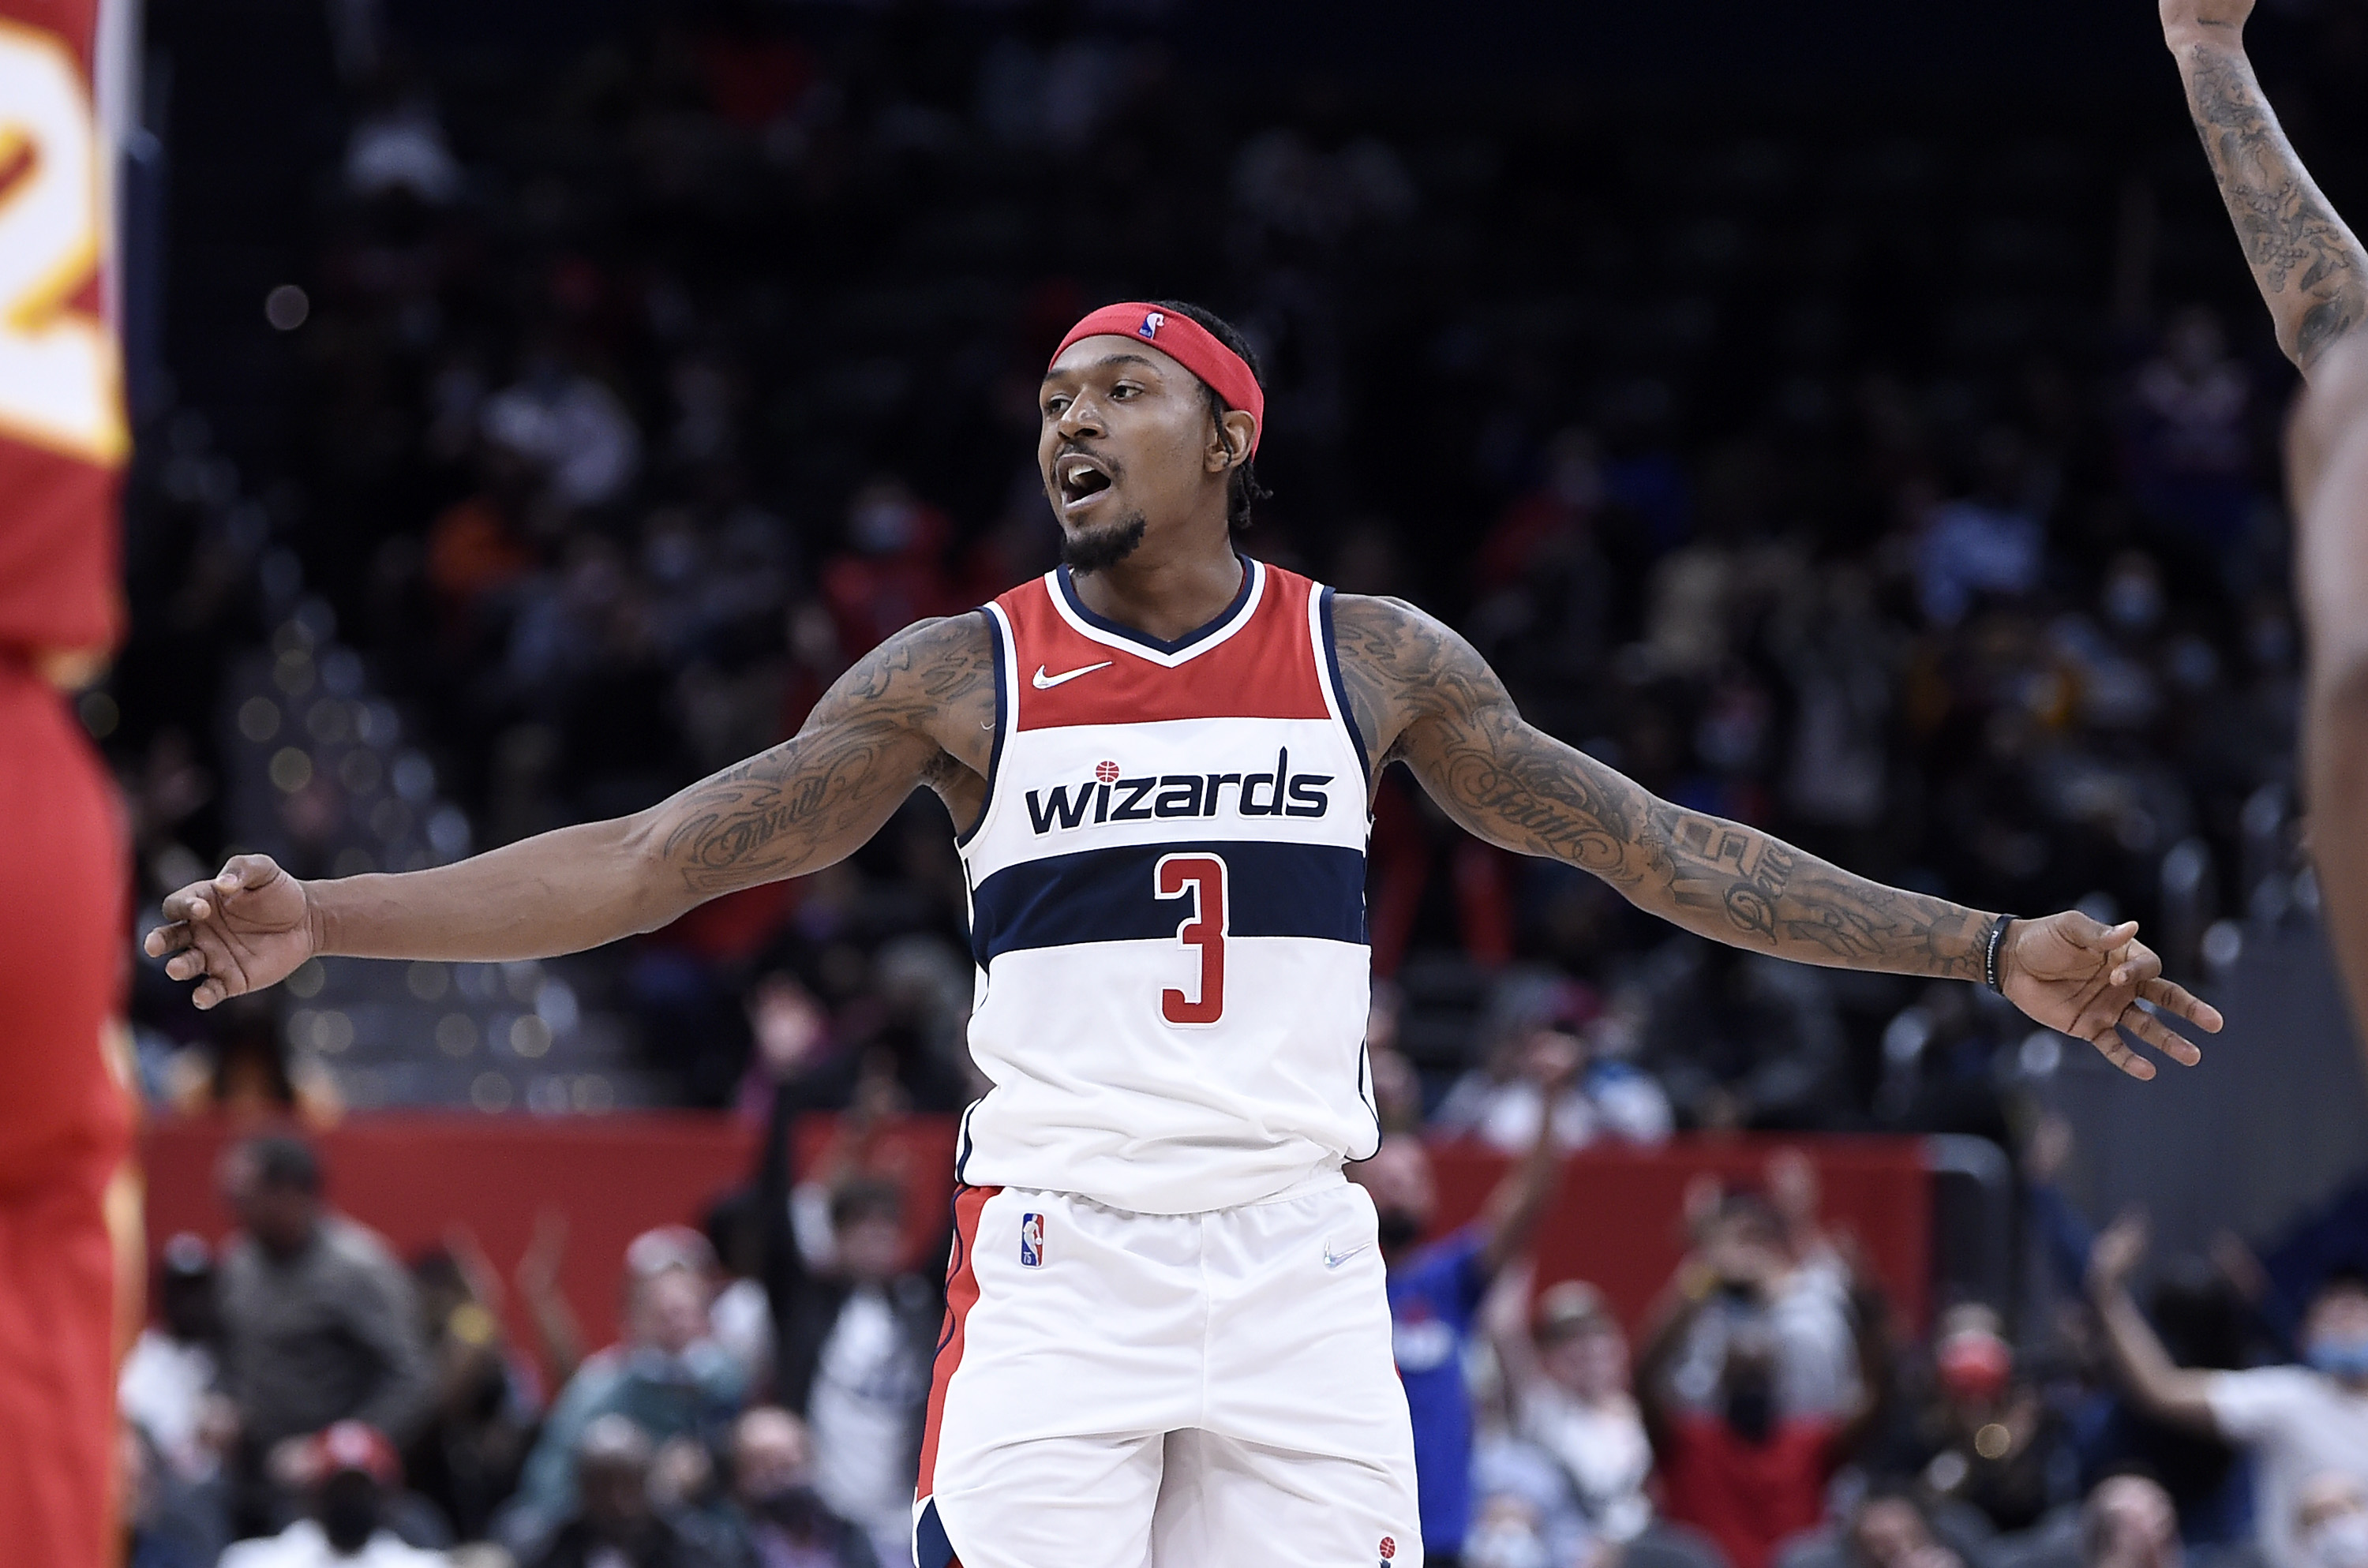 Wizards star Bradley Beal celebrates during a win over the Atlanta Hawks